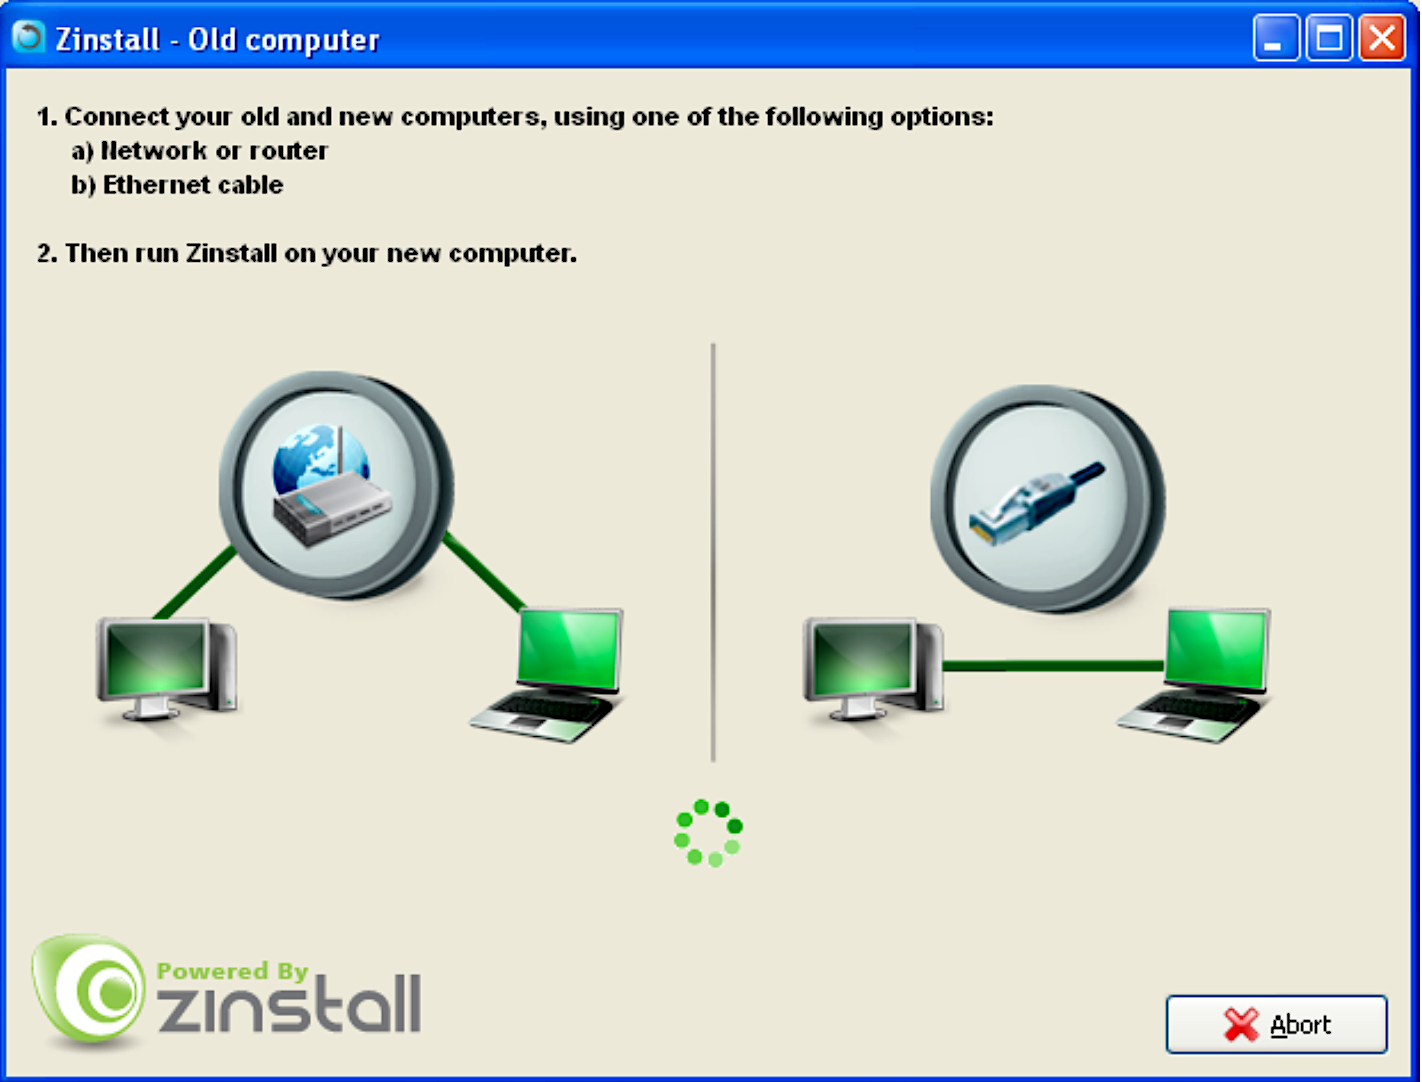 connect old computer with new computer in zinstall winiwn